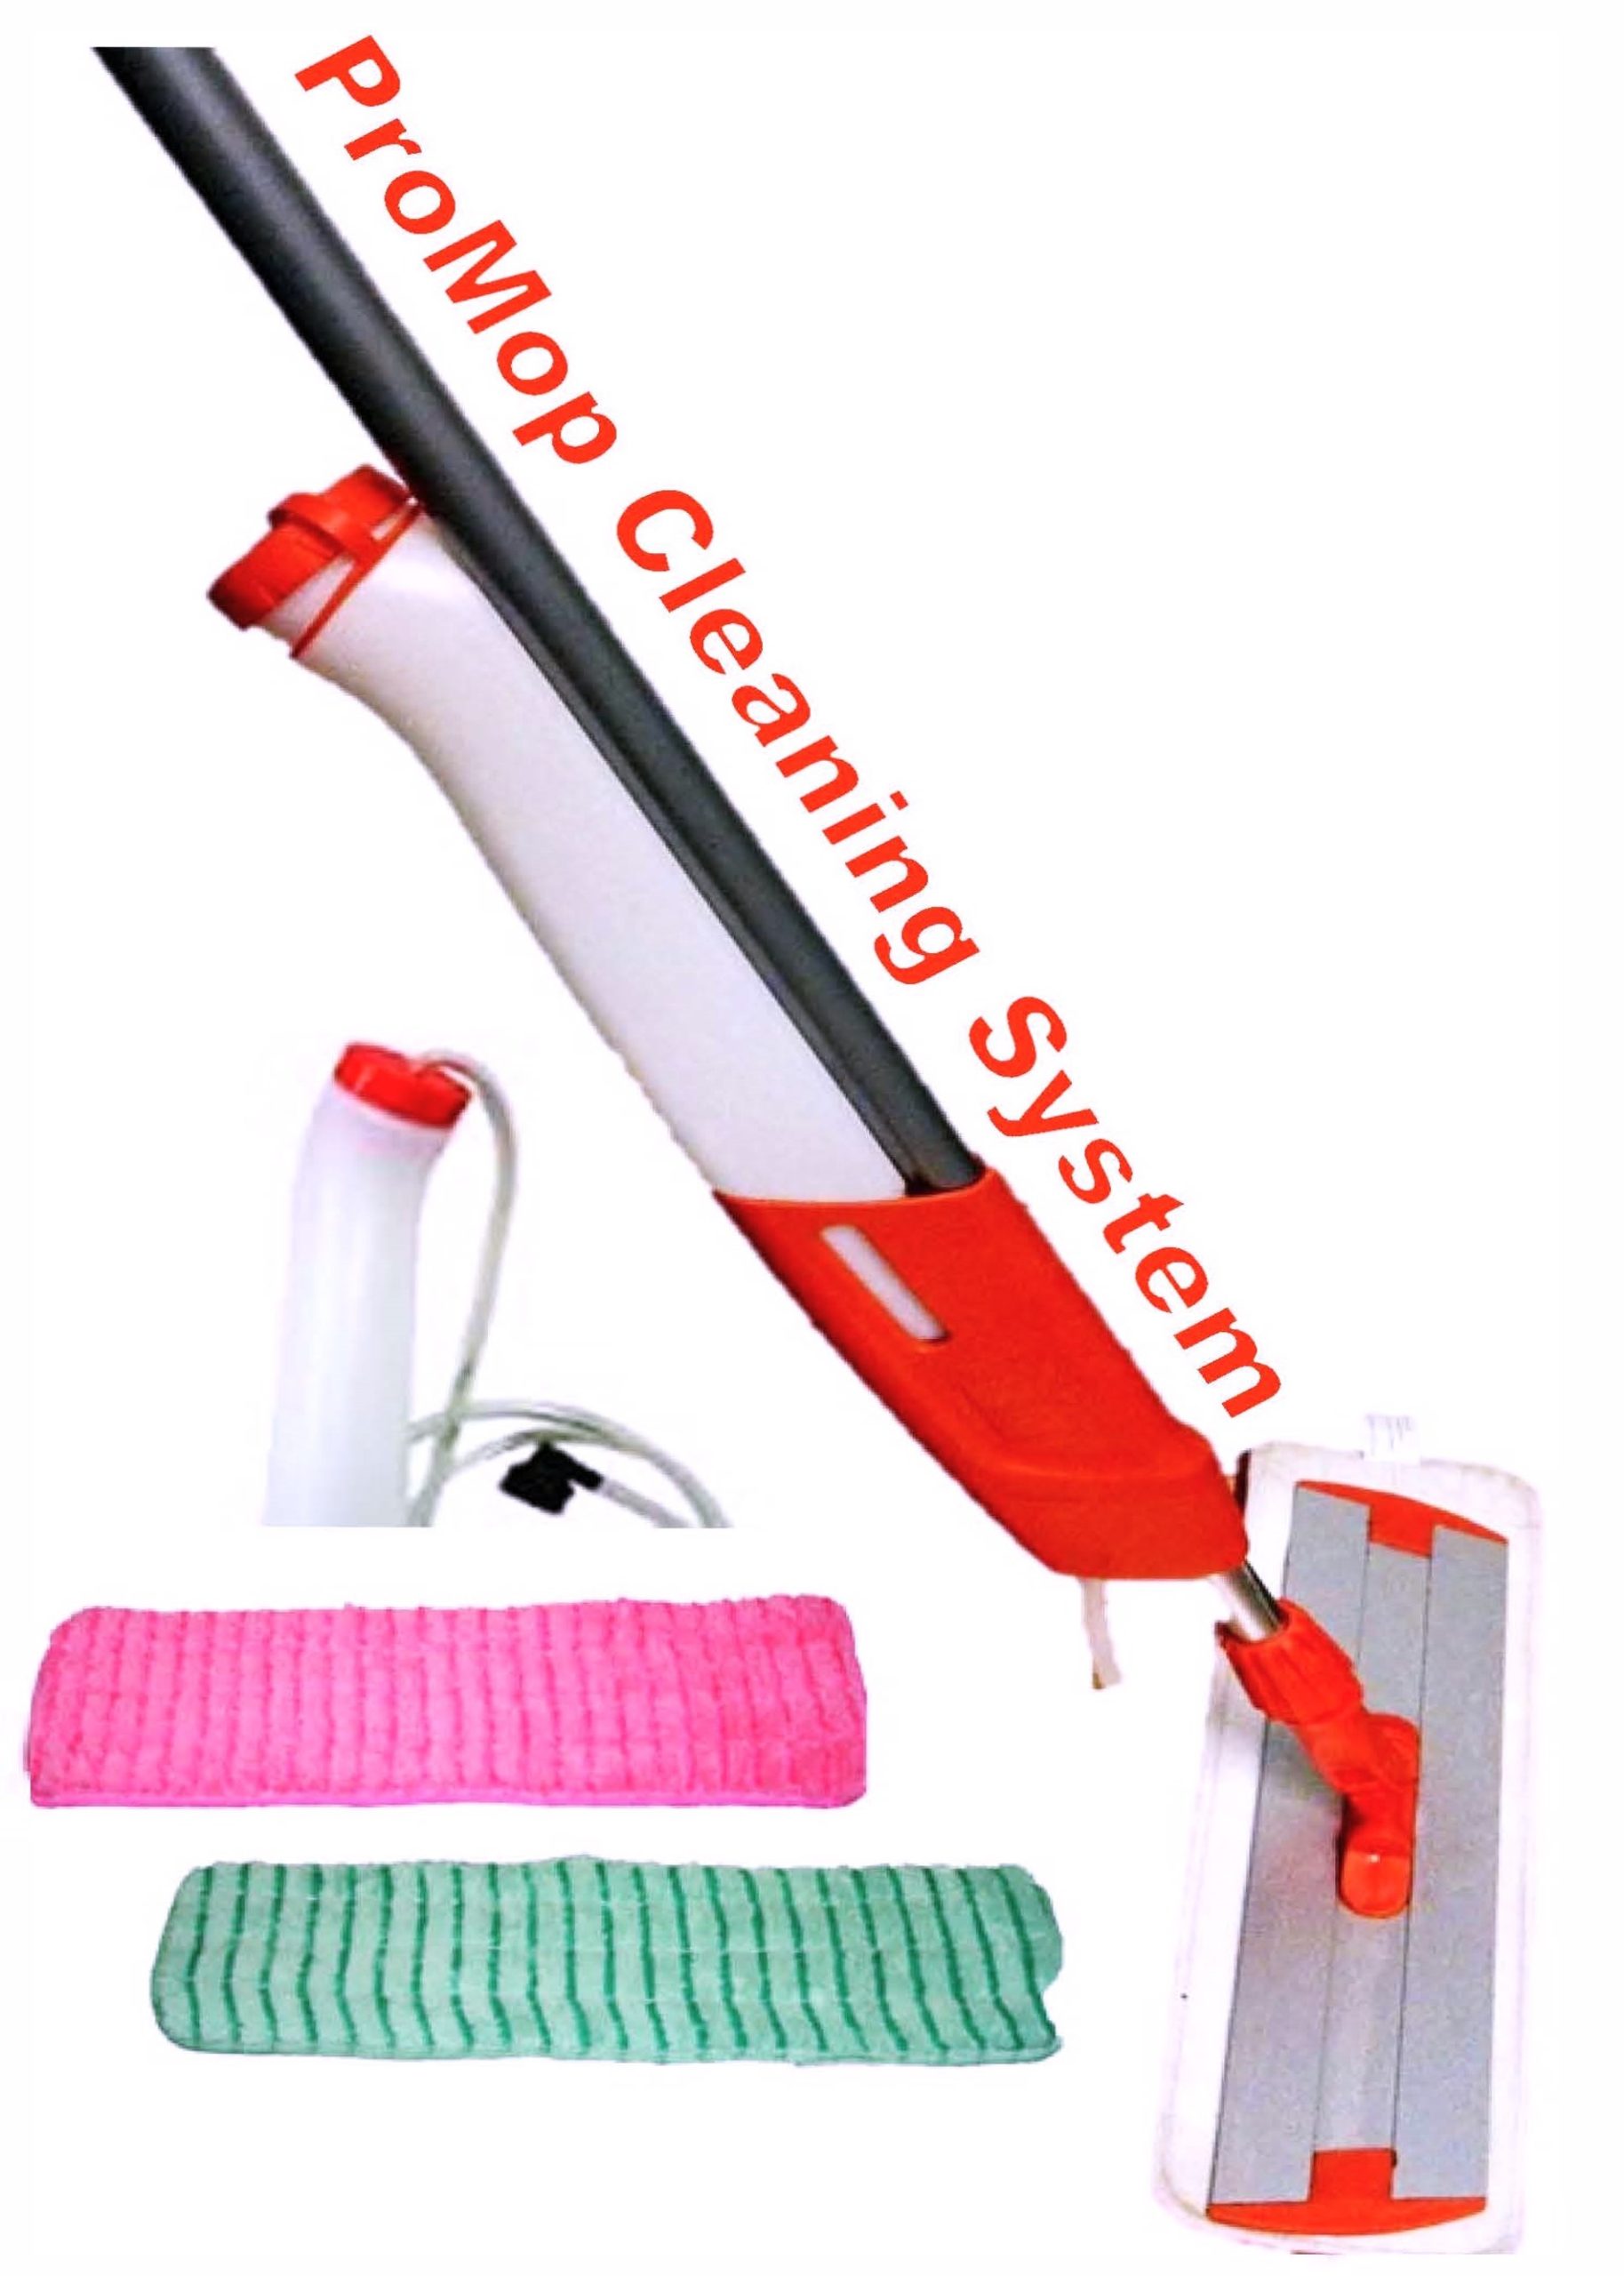 ProMop Bucketless Cleaning System Kit